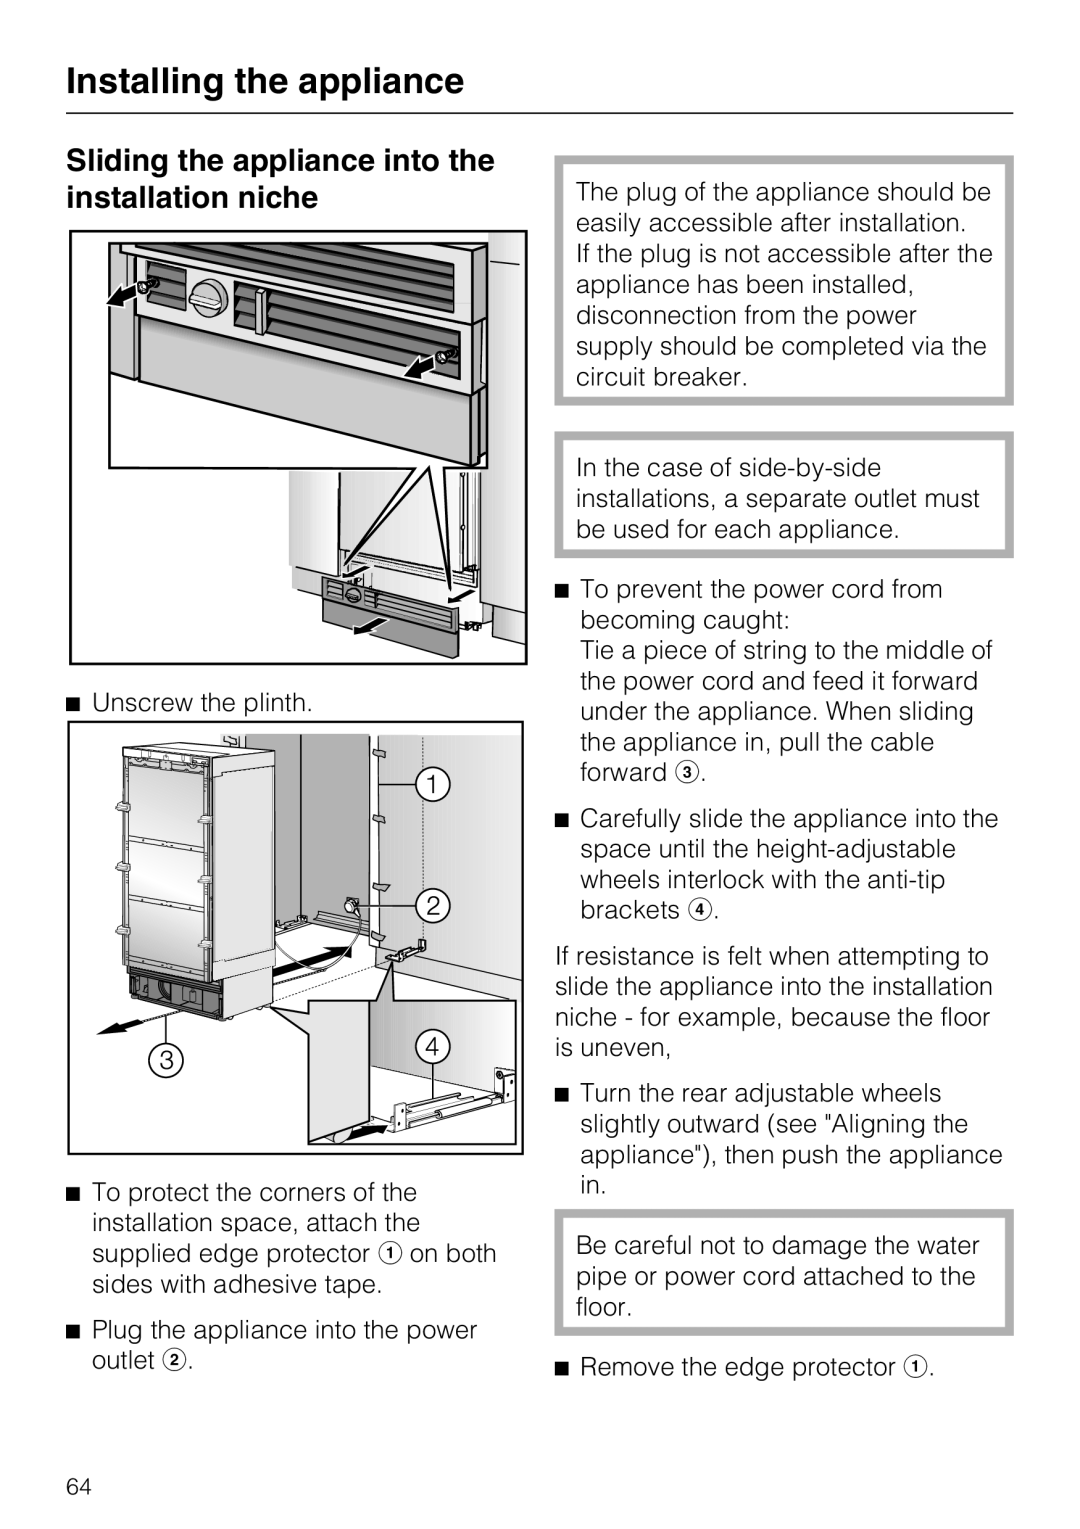 Miele F1471VI installation instructions Sliding the appliance into the installation niche, Installing the appliance 